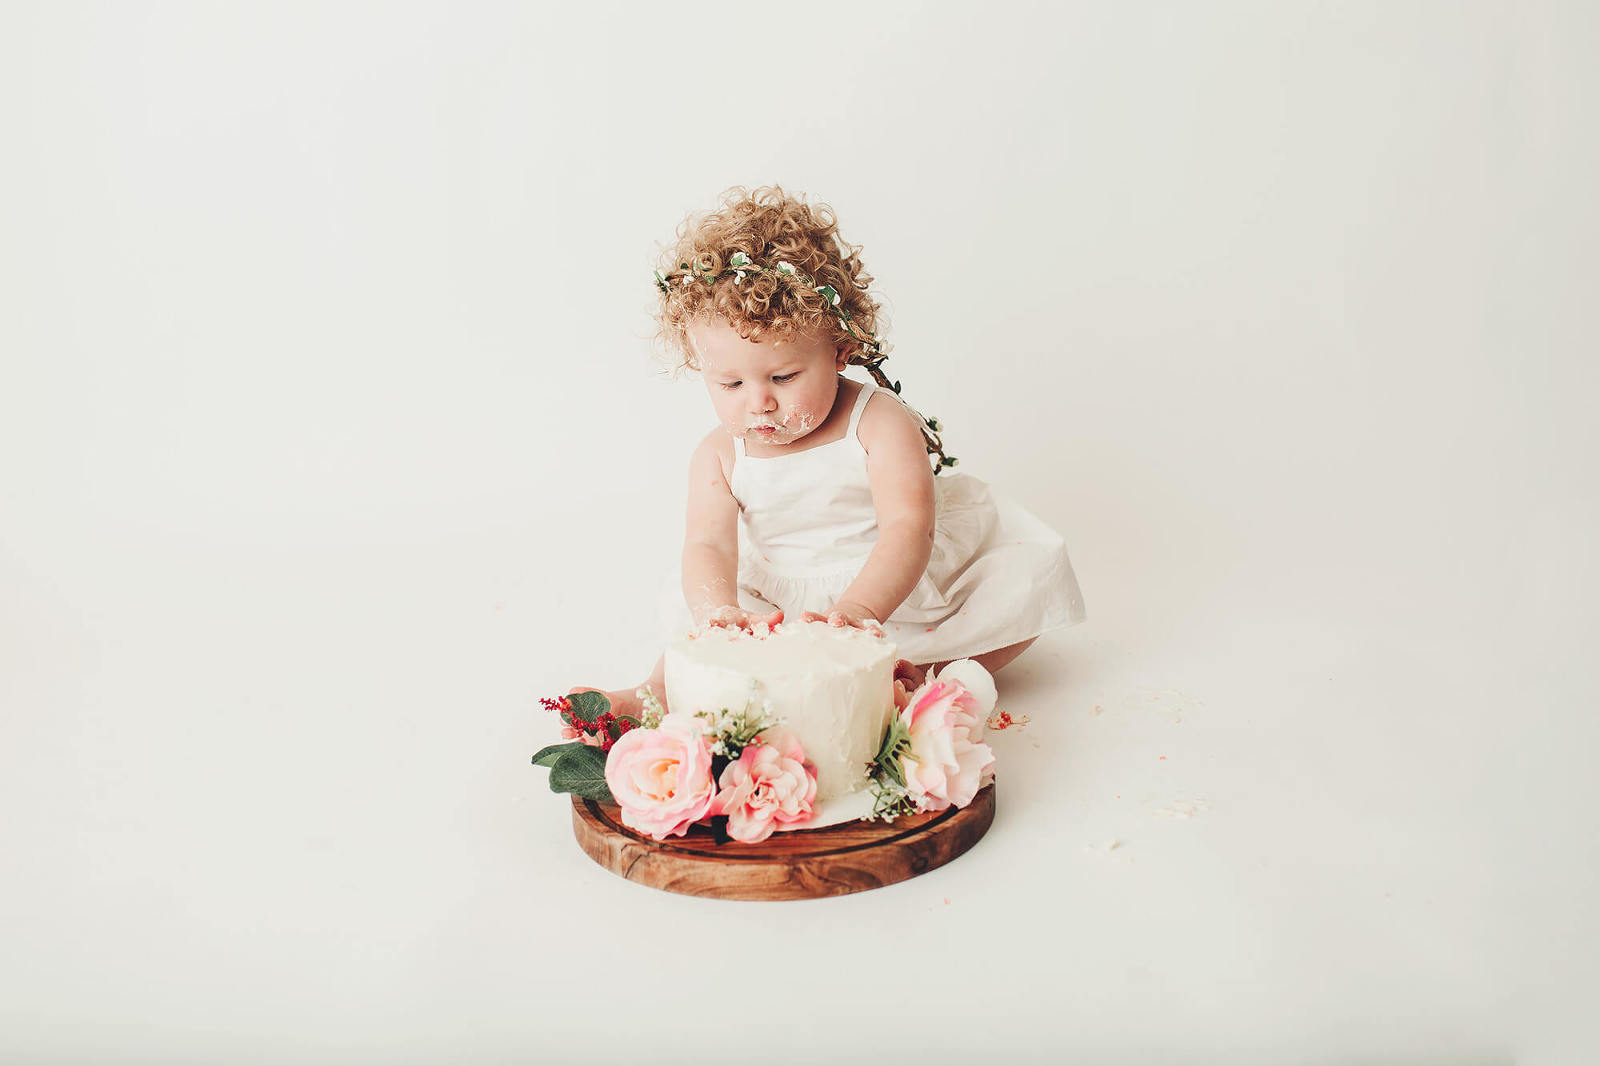 Cake smash session with pink flowers and a petite floral crown